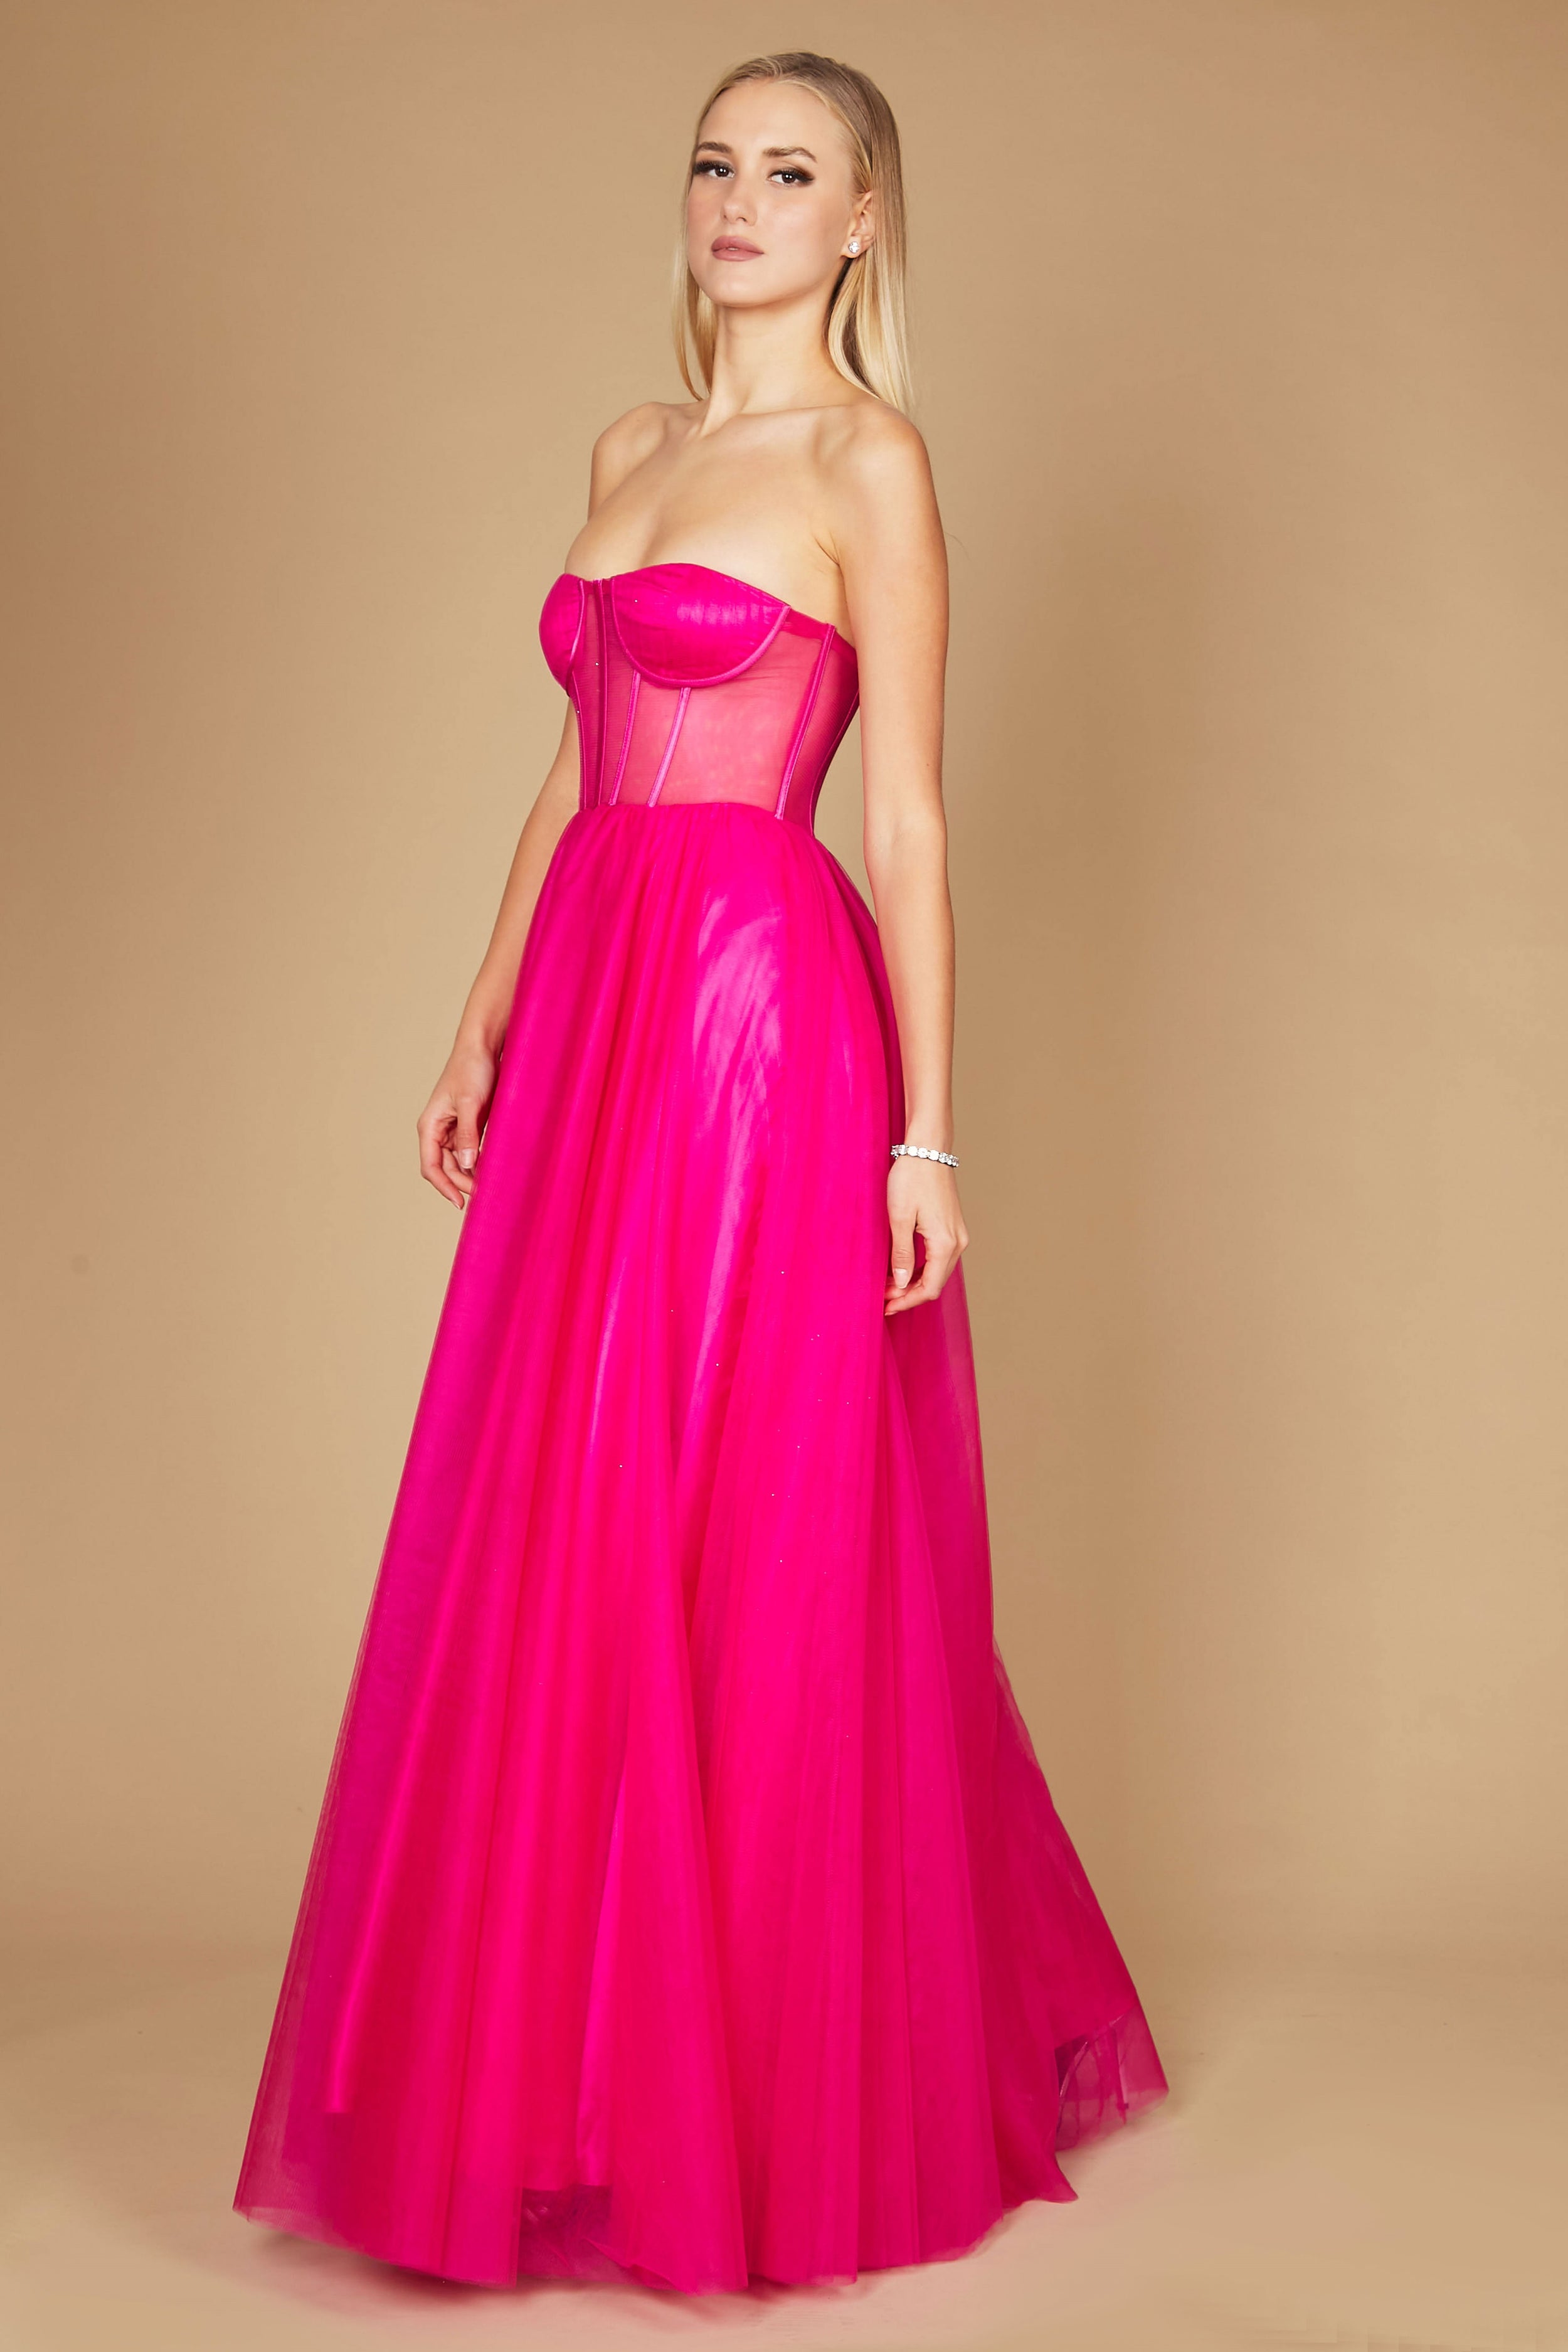 Prom Dresses Corset Prom Party Dress Formal Ball Gown Fuchsia